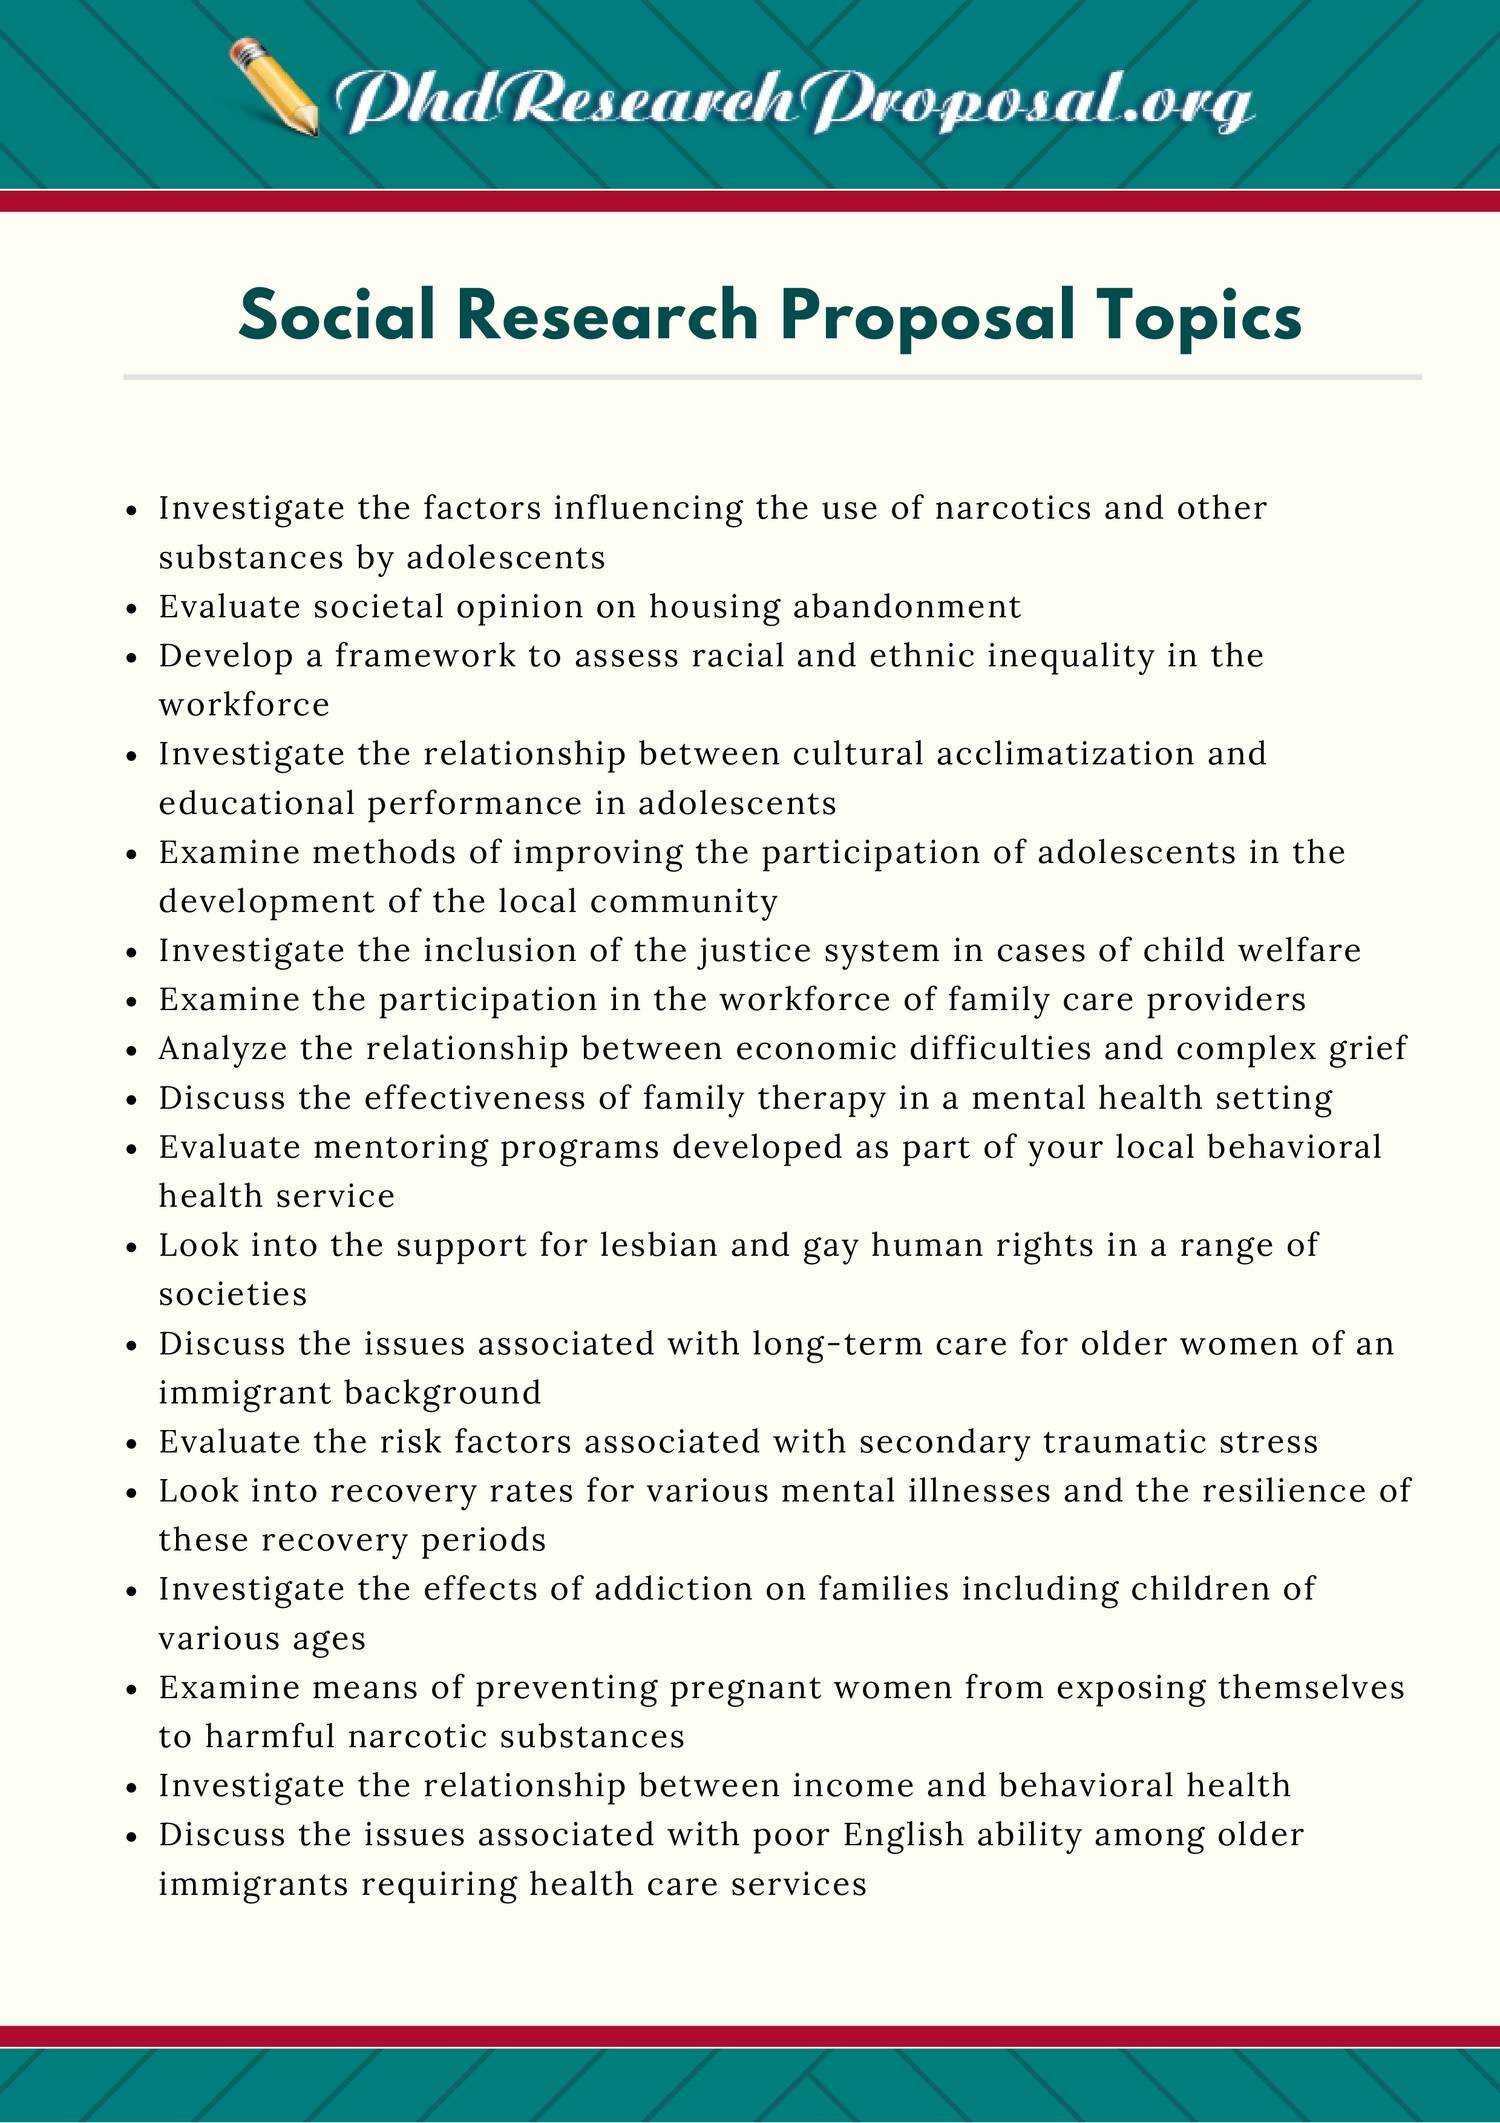 examples of research topics in social work